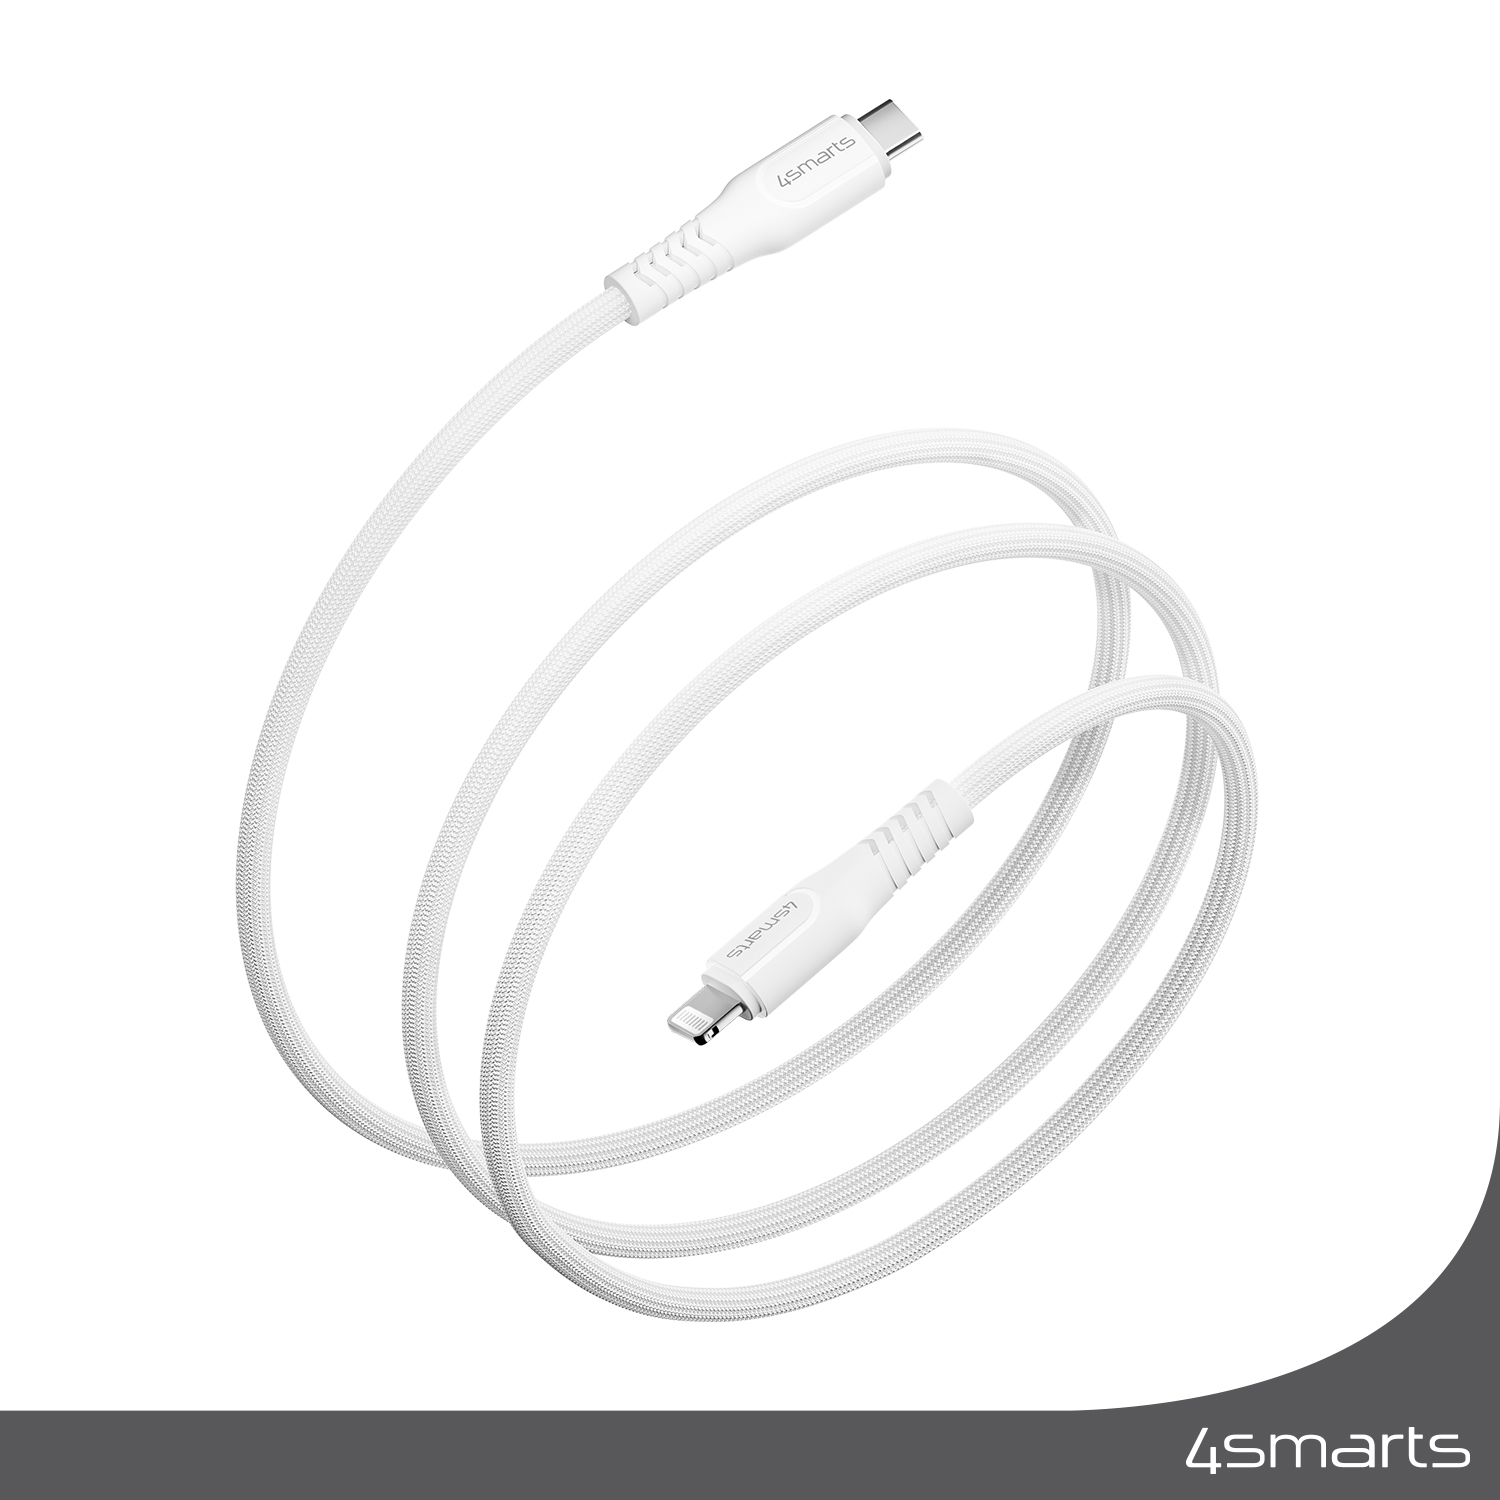 The 4smarts USB-C to Lightning cable RapidCord PD 30W is very robust and durable due to its high-quality workmanship.